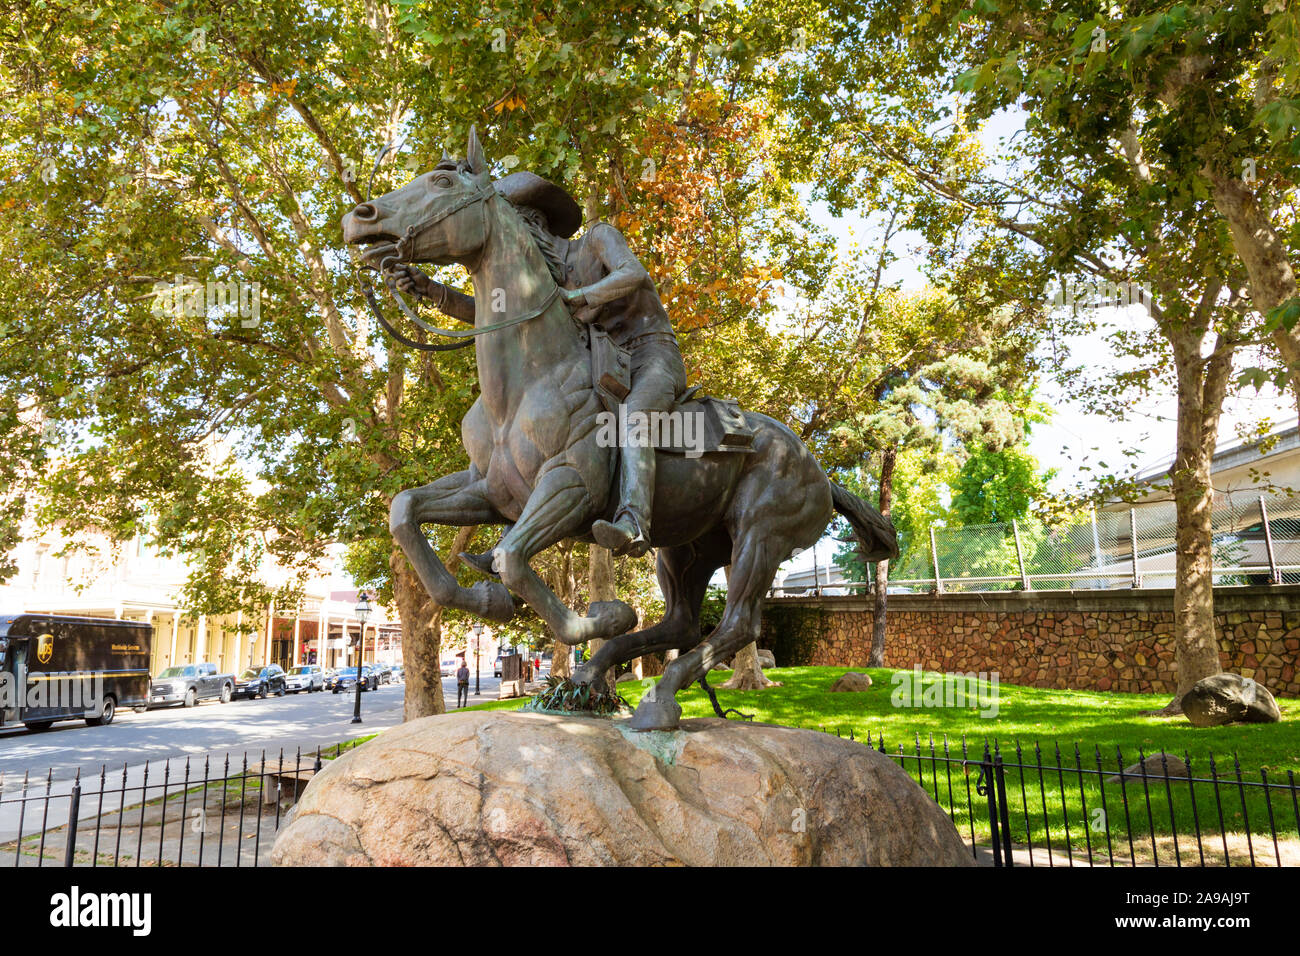 Pony Express monument statue, Second and J Street, Old Town, Sacramento, California, United States of America. USA Stock Photo